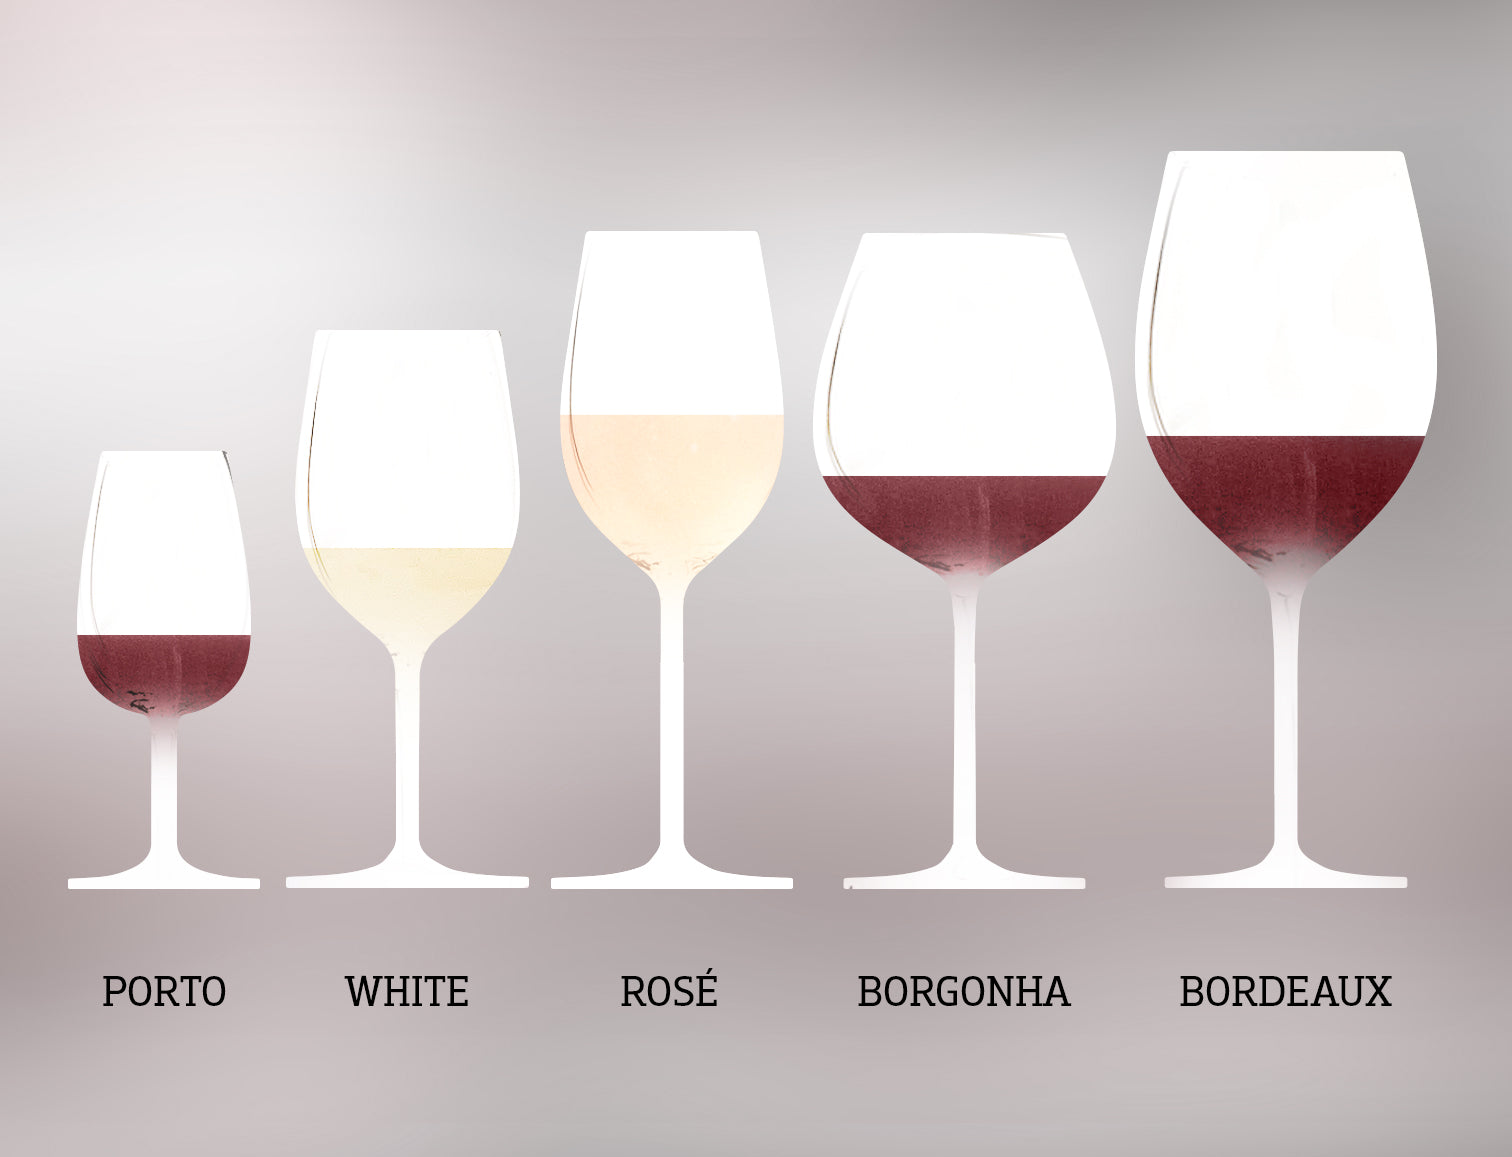 What does the ideal red wine glass and white wine glass look like? - Quora